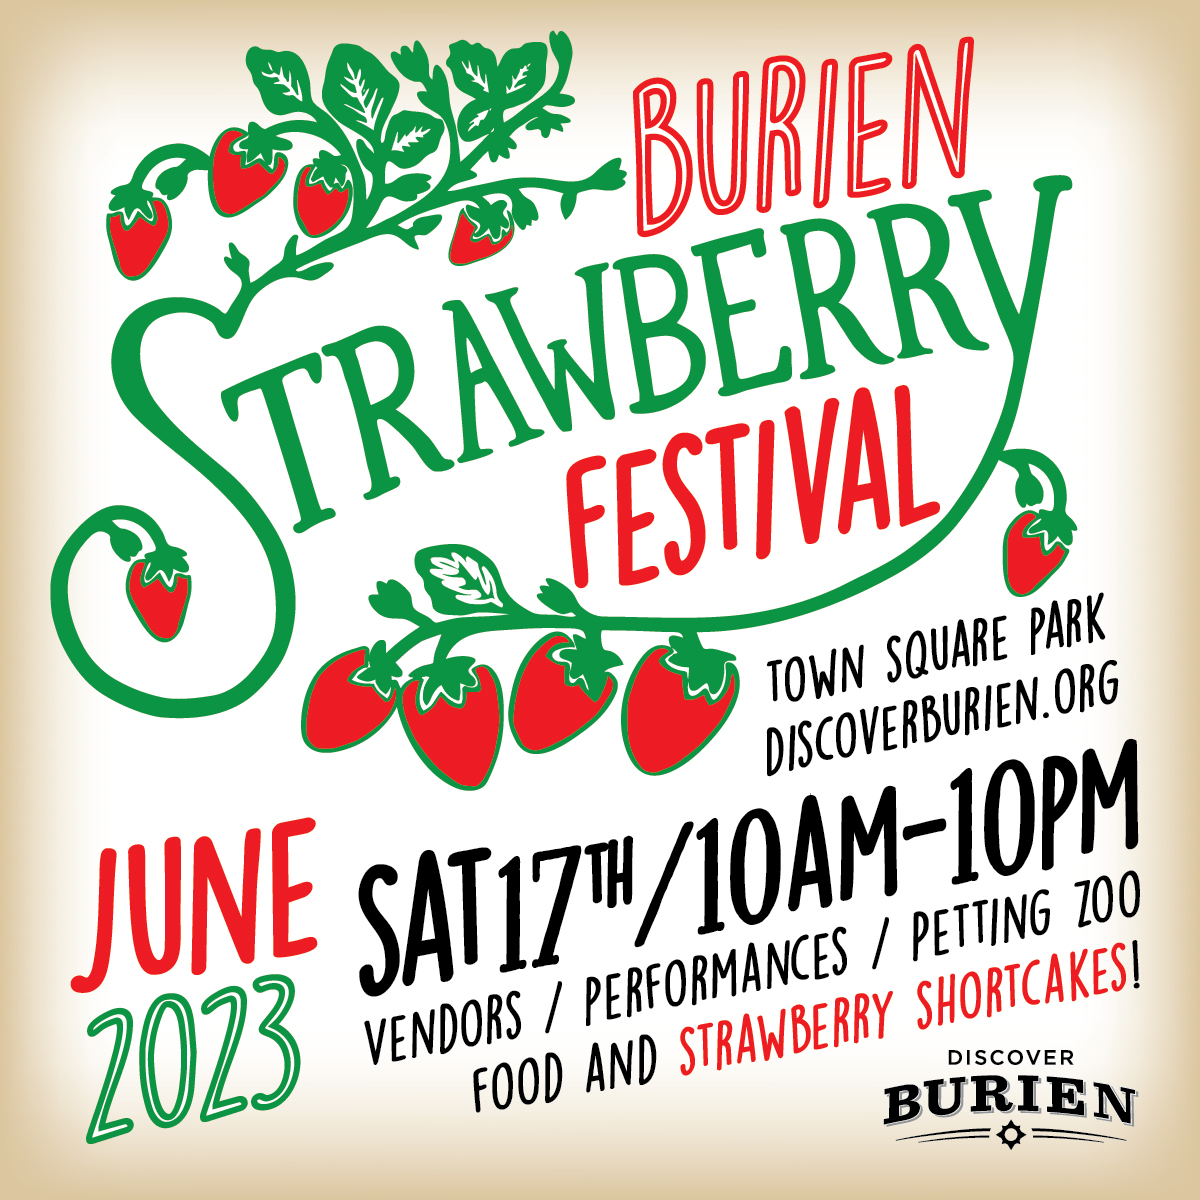 Come check out the Burien Strawberry Festival! Lots of great fun! 🍓🍓